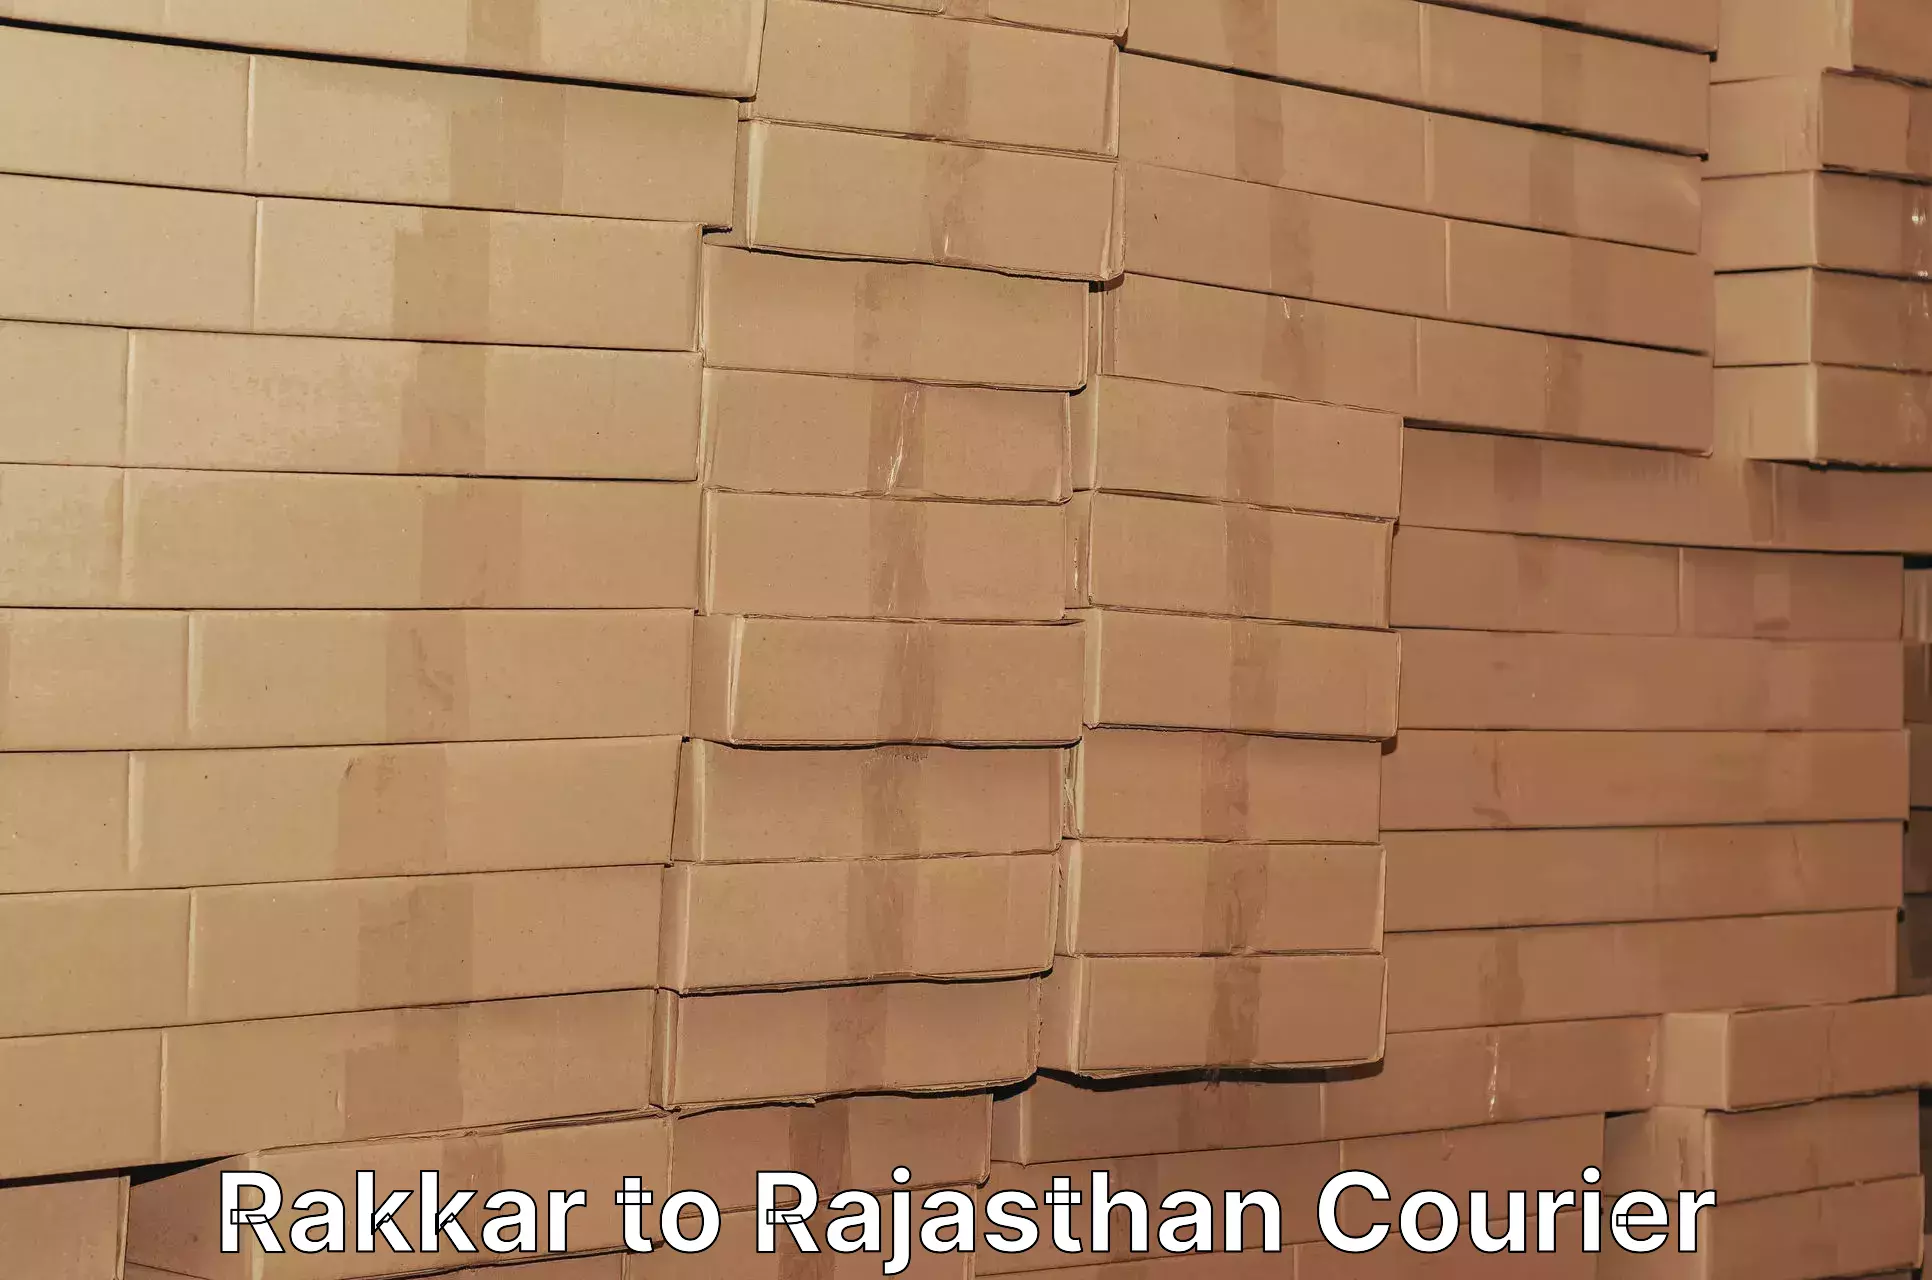 Efficient order fulfillment in Rakkar to Yeswanthapur